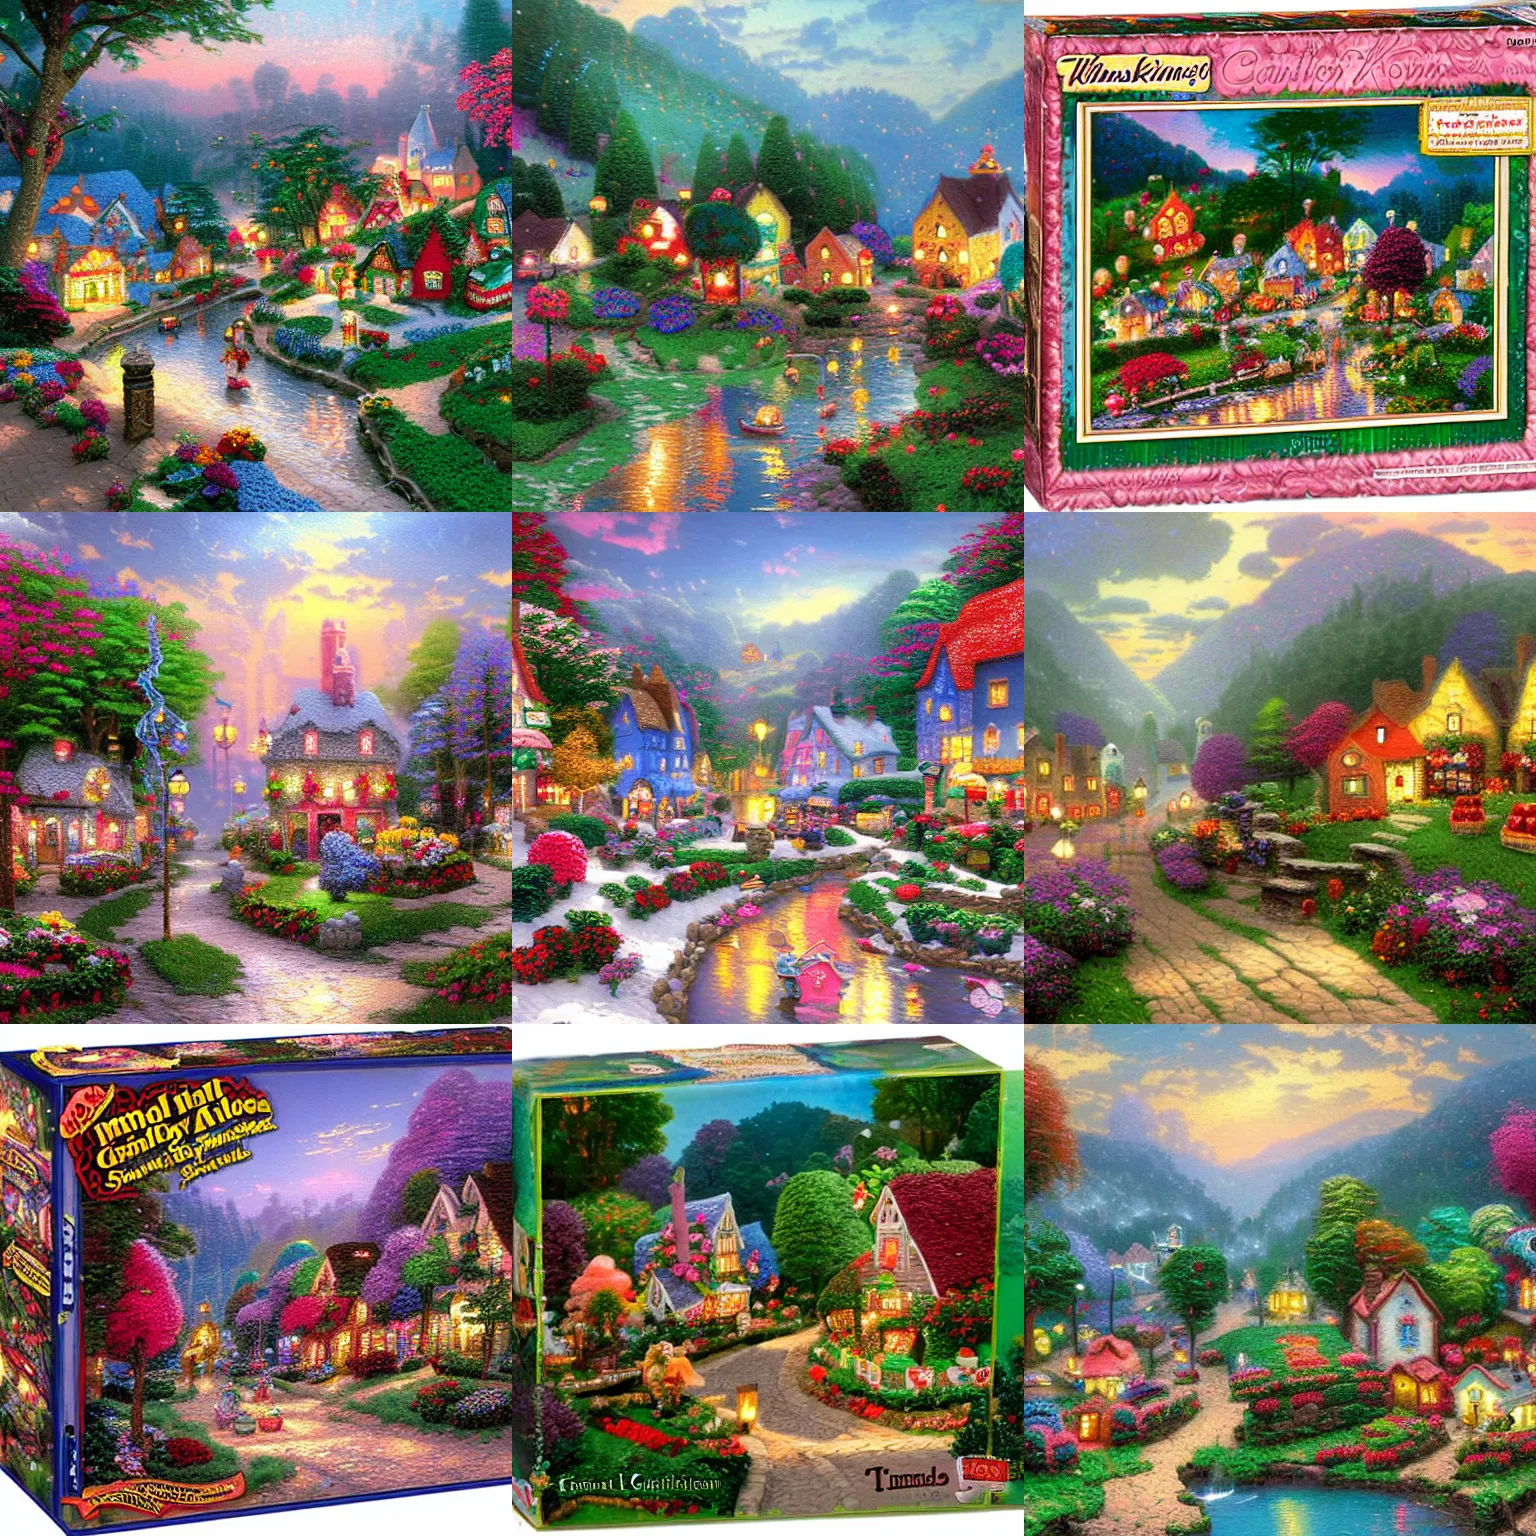 Prompt: Small little village made of candy by thomas kinkade